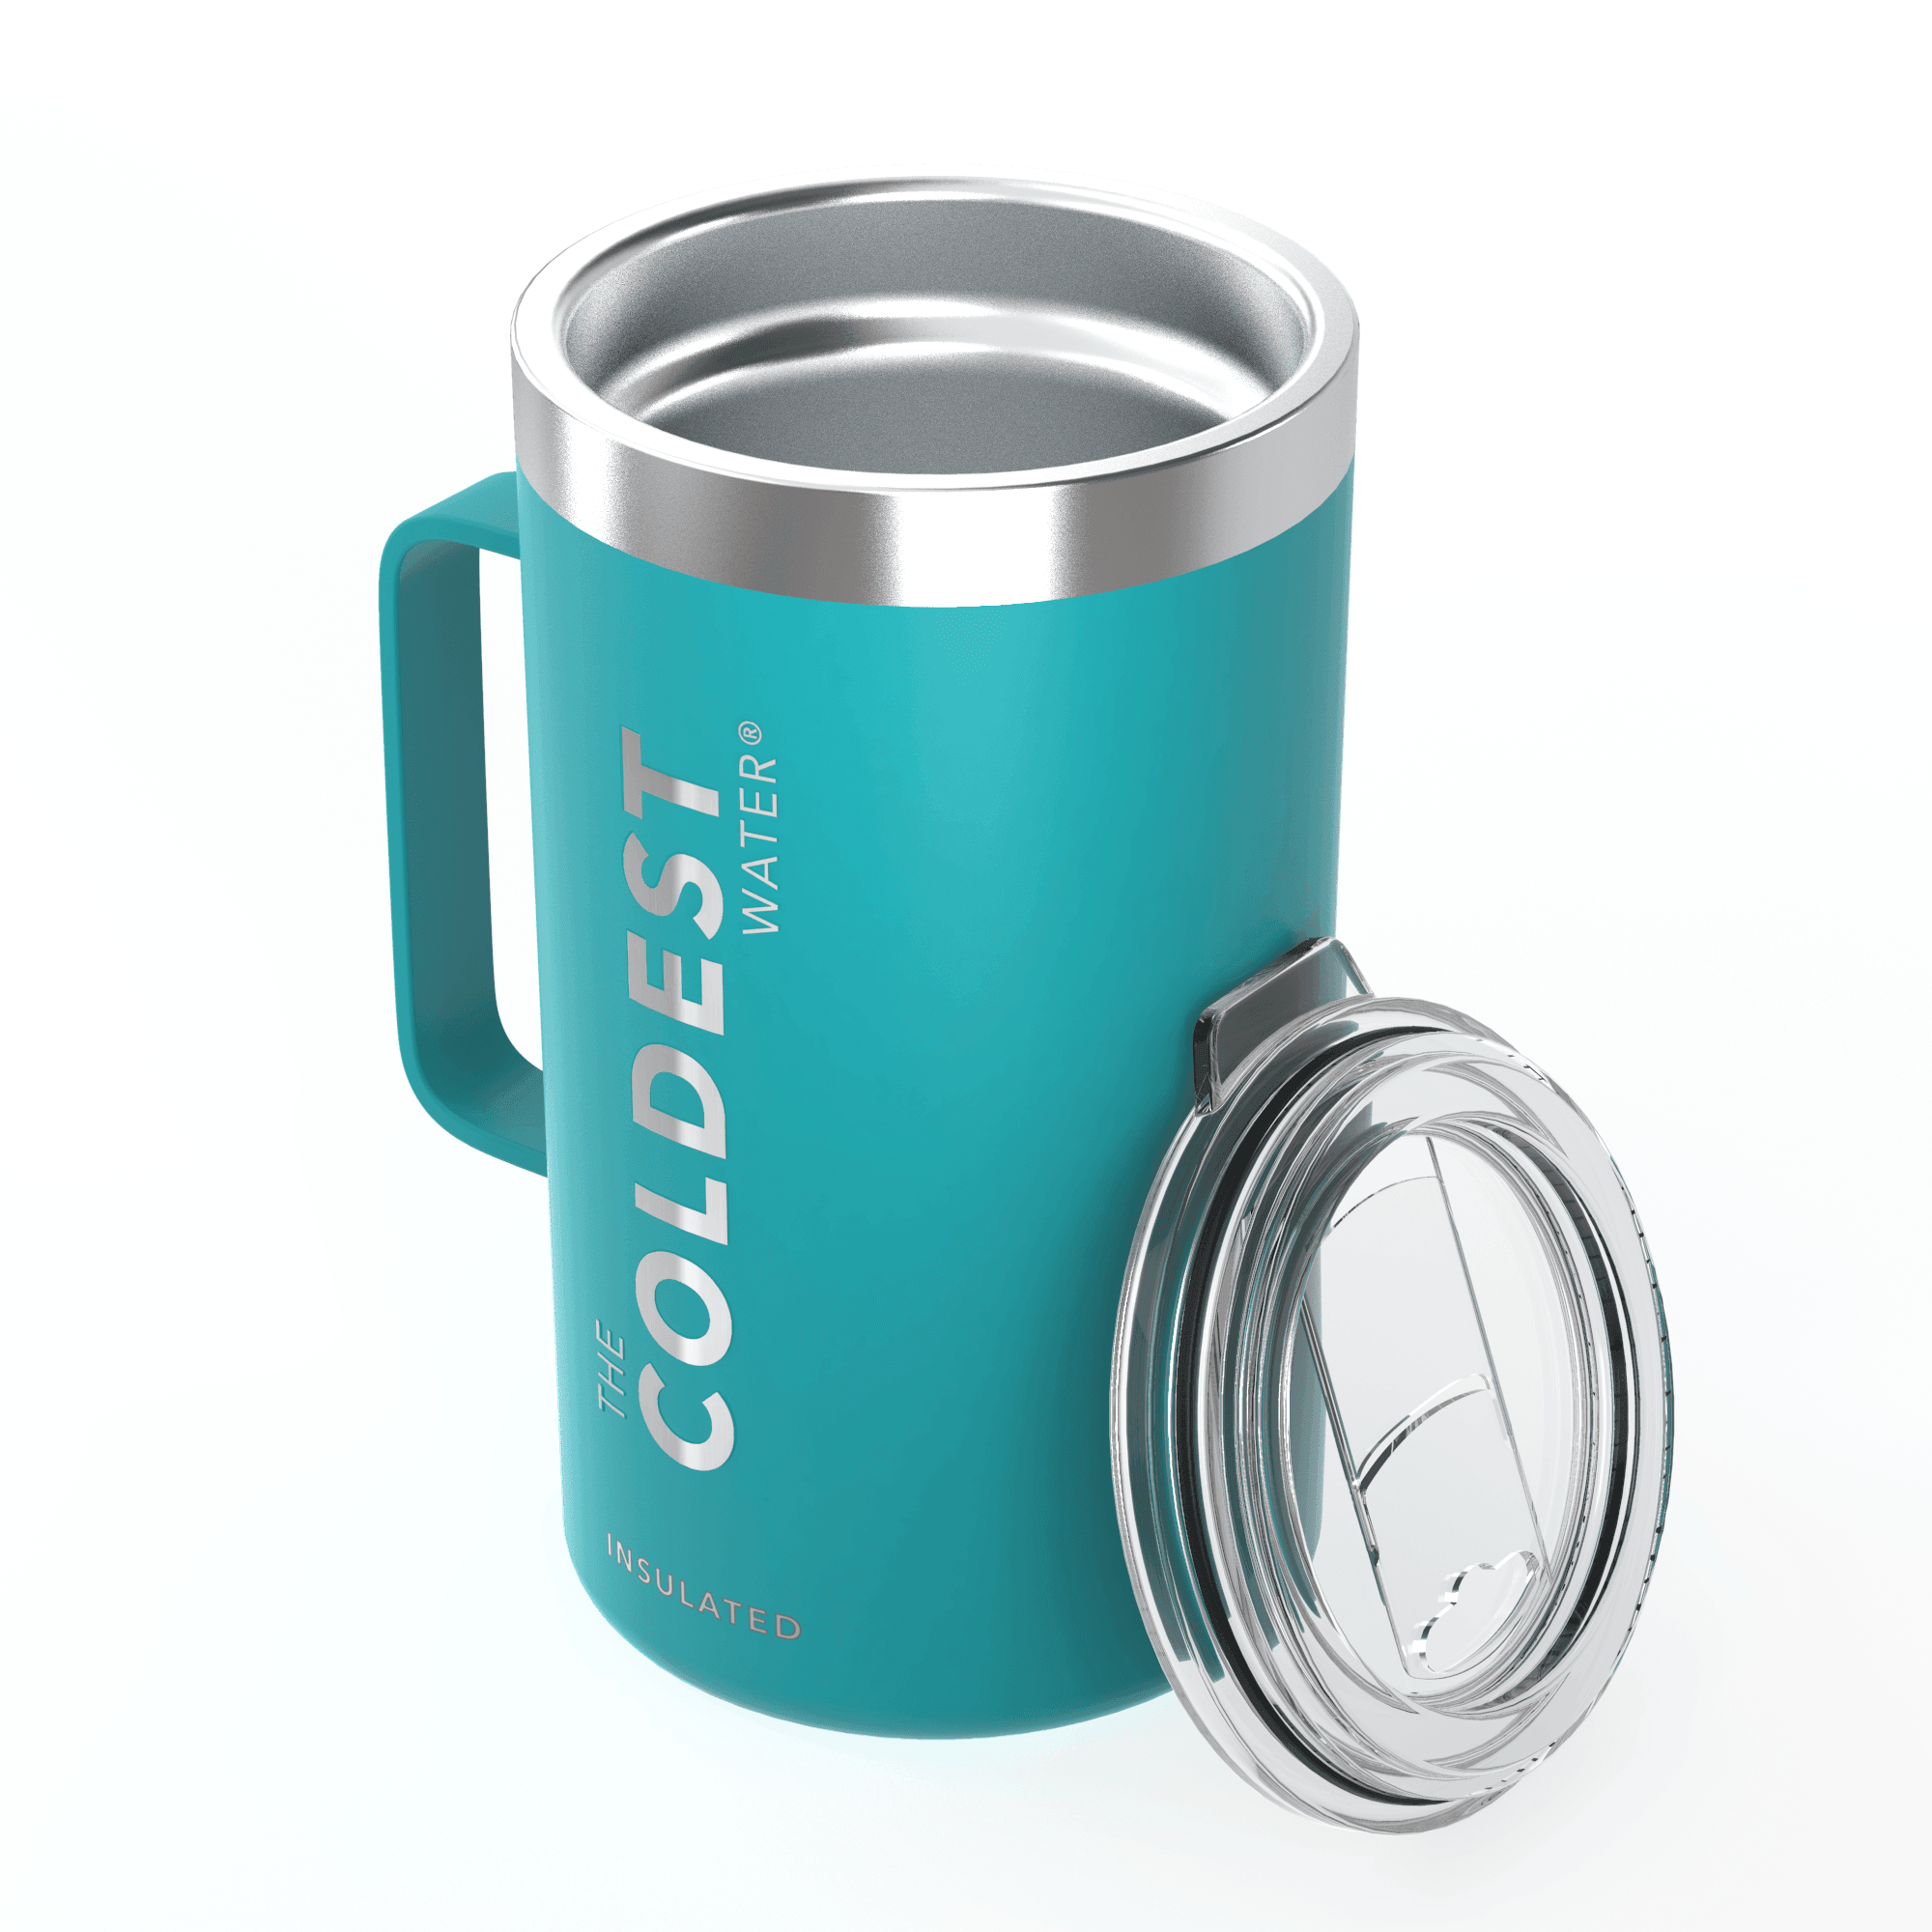 The Coldest Coffee Mug - Stainless Steel Super Insulated Travel Mug for Hot  & Cold Drinks, Best for Tea, Lattes, Cappuccino Coffee Cup( Sahara Peach 24  Oz) 